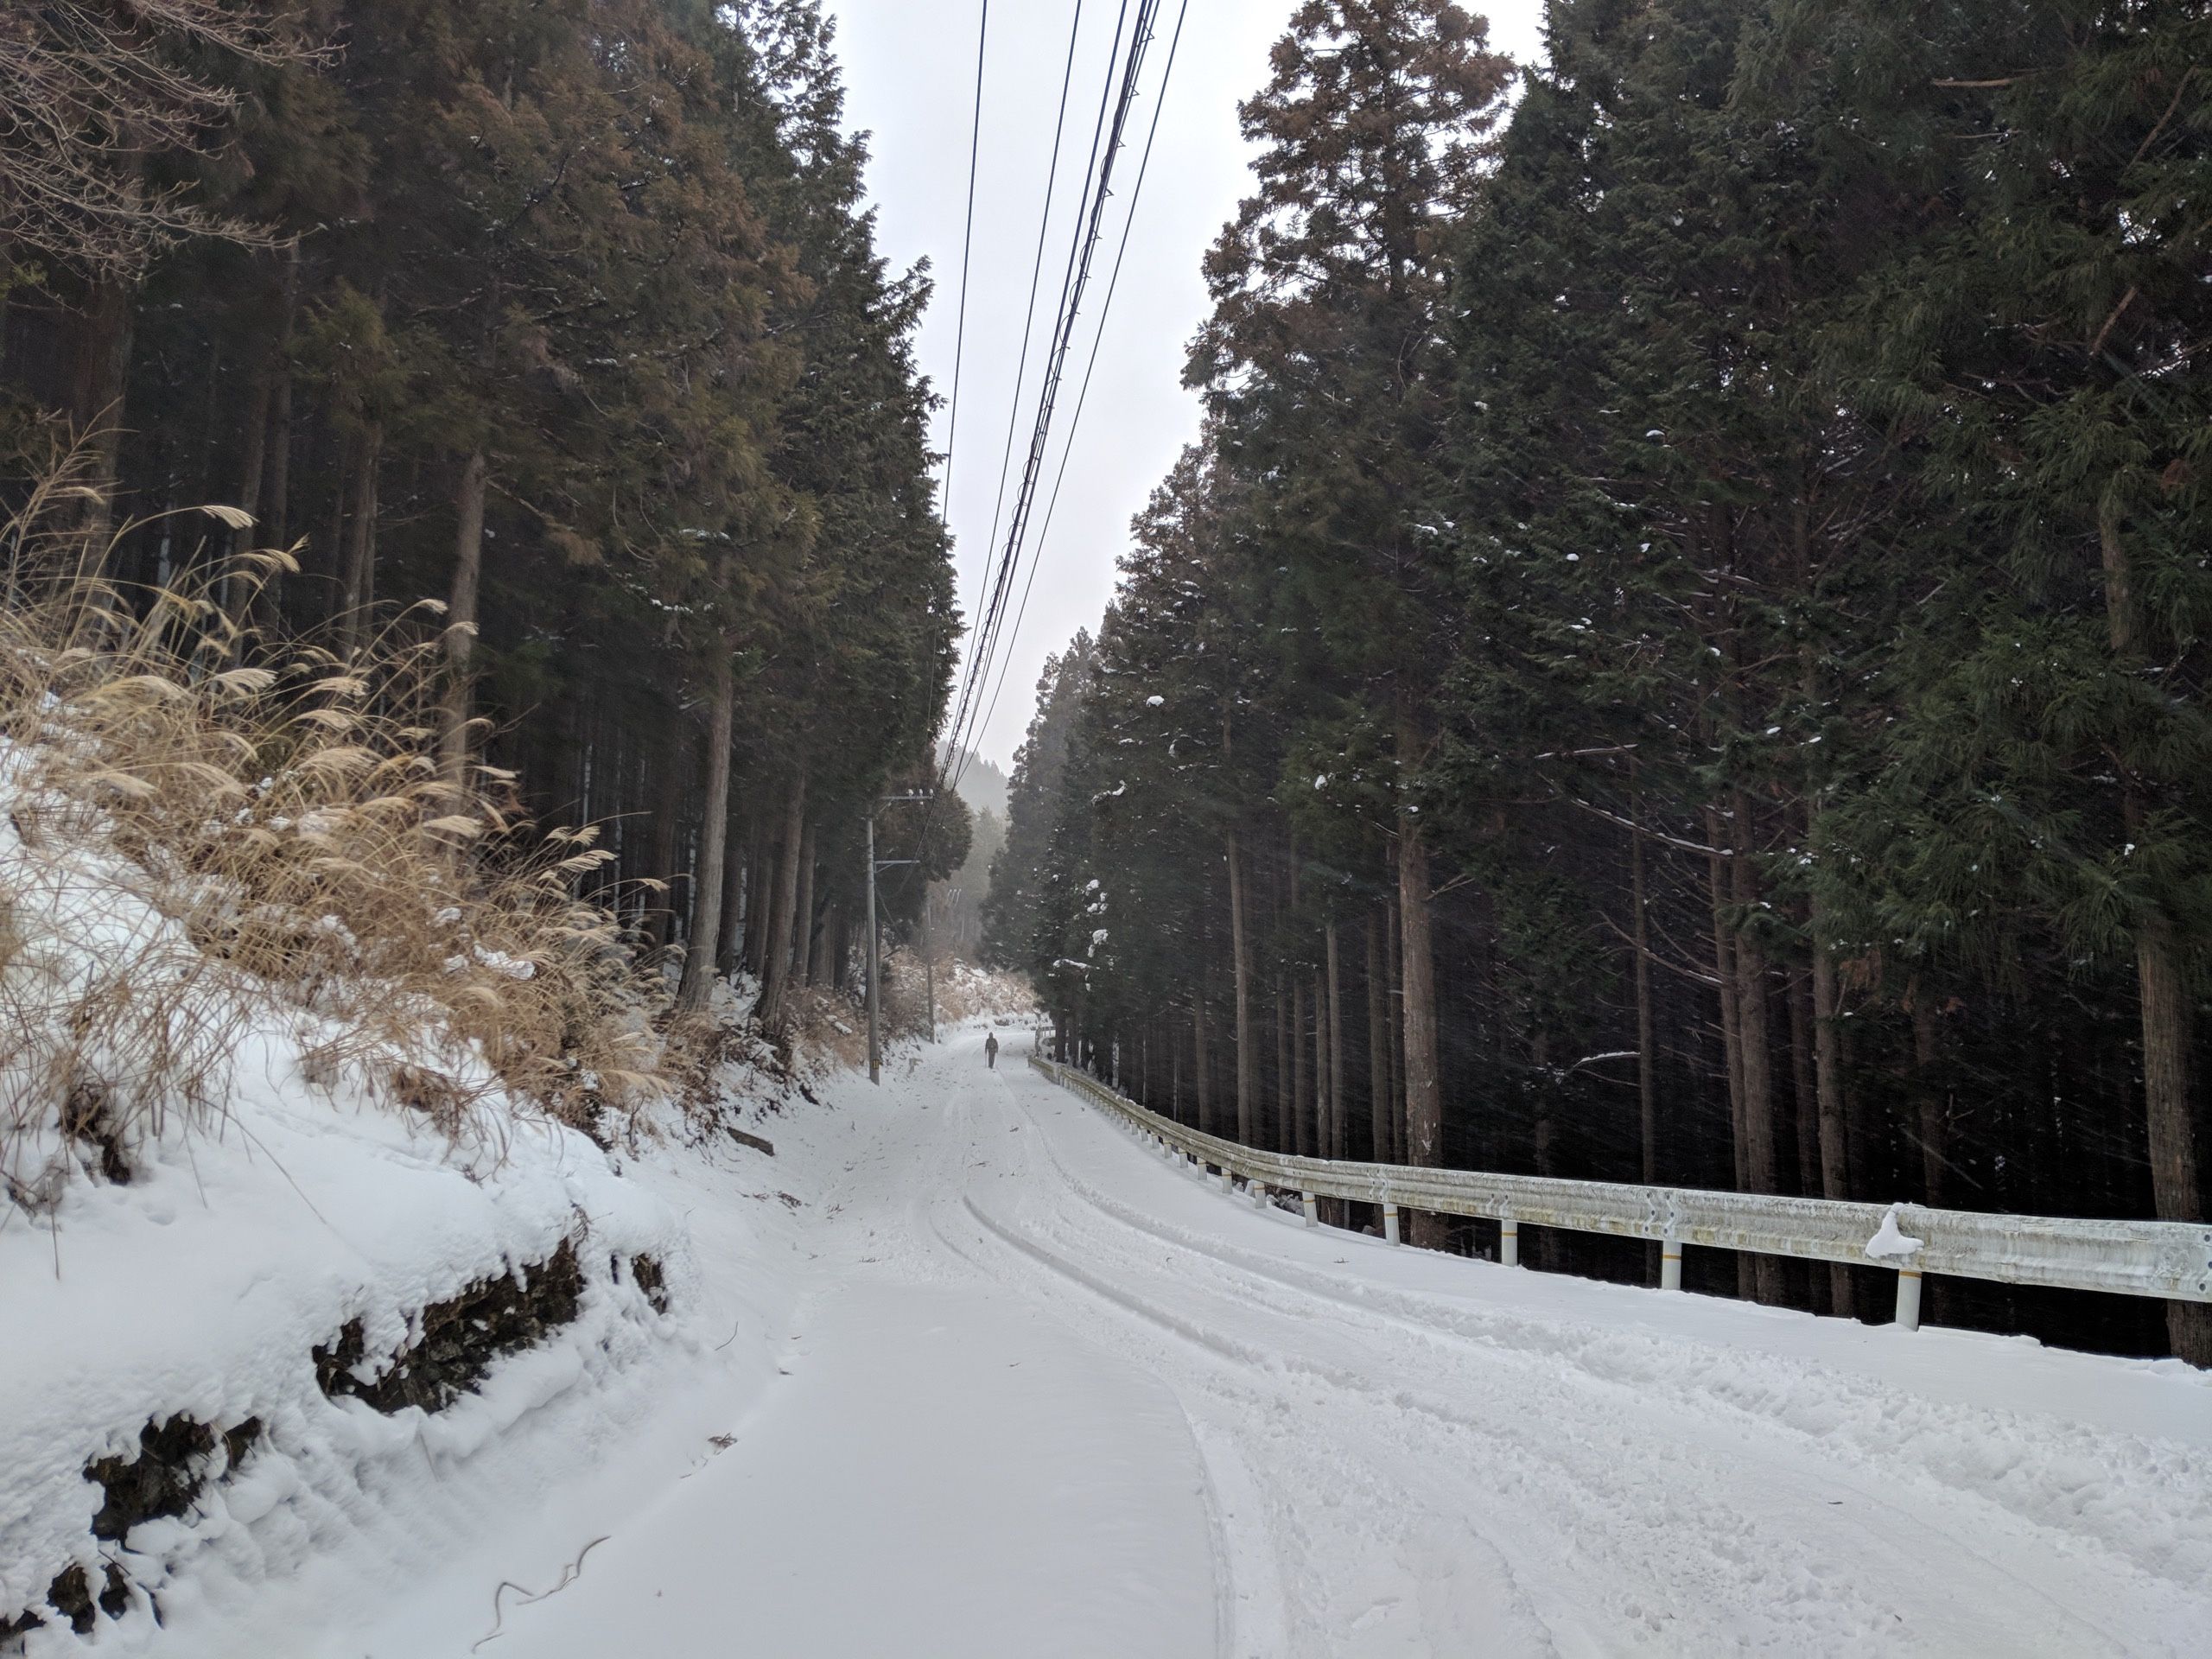 In the distance, a human figure walk on a snow-covered road in a forest.